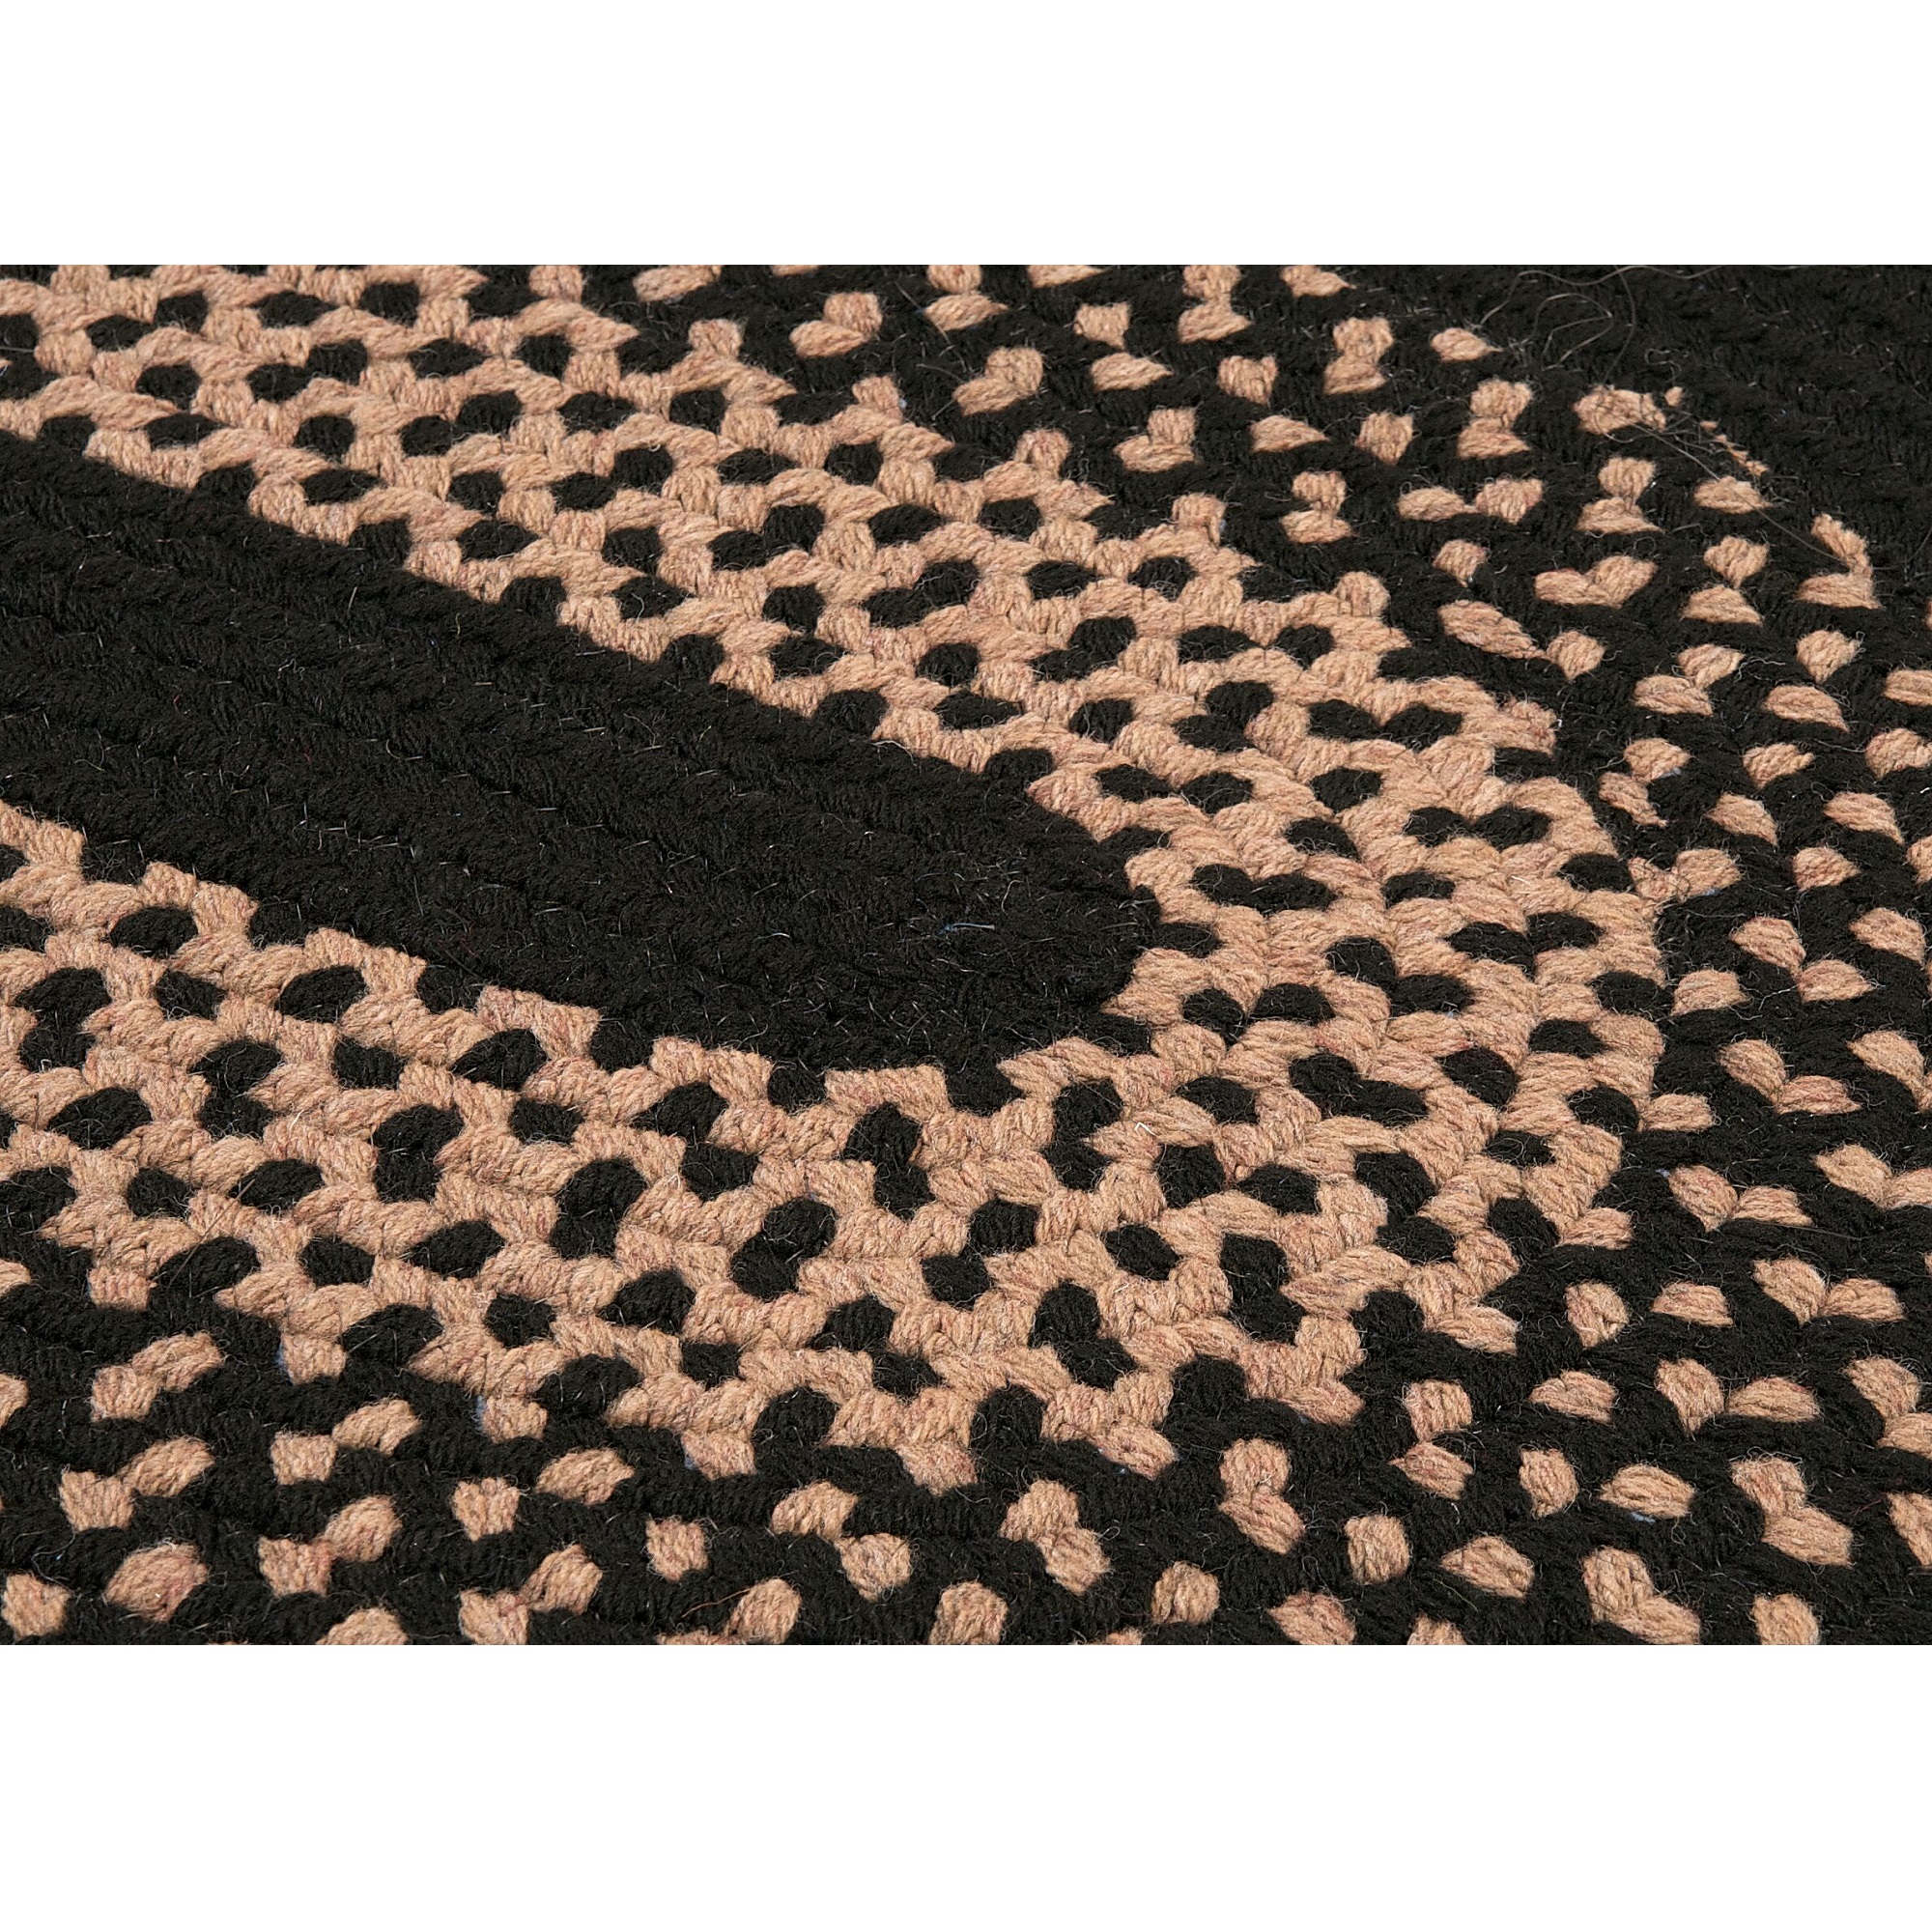 Colonial Mills 6' Black and Beige Braided Round Area Throw Rug